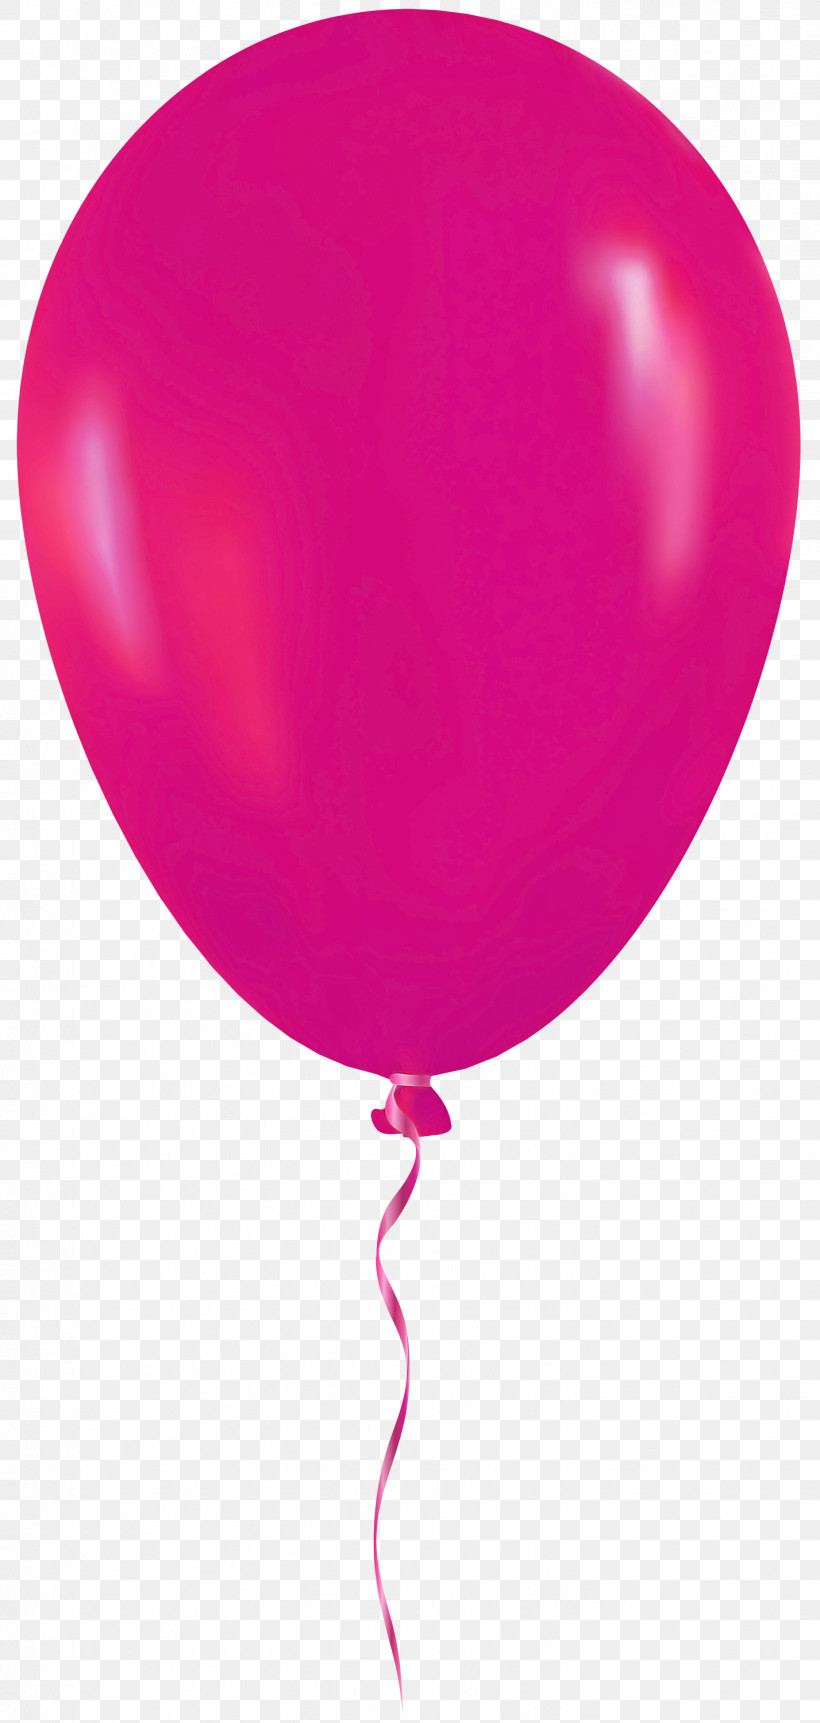 Balloon Pink Party Supply Magenta Heart, PNG, 1427x3000px, Balloon, Heart, Magenta, Party Supply, Pink Download Free